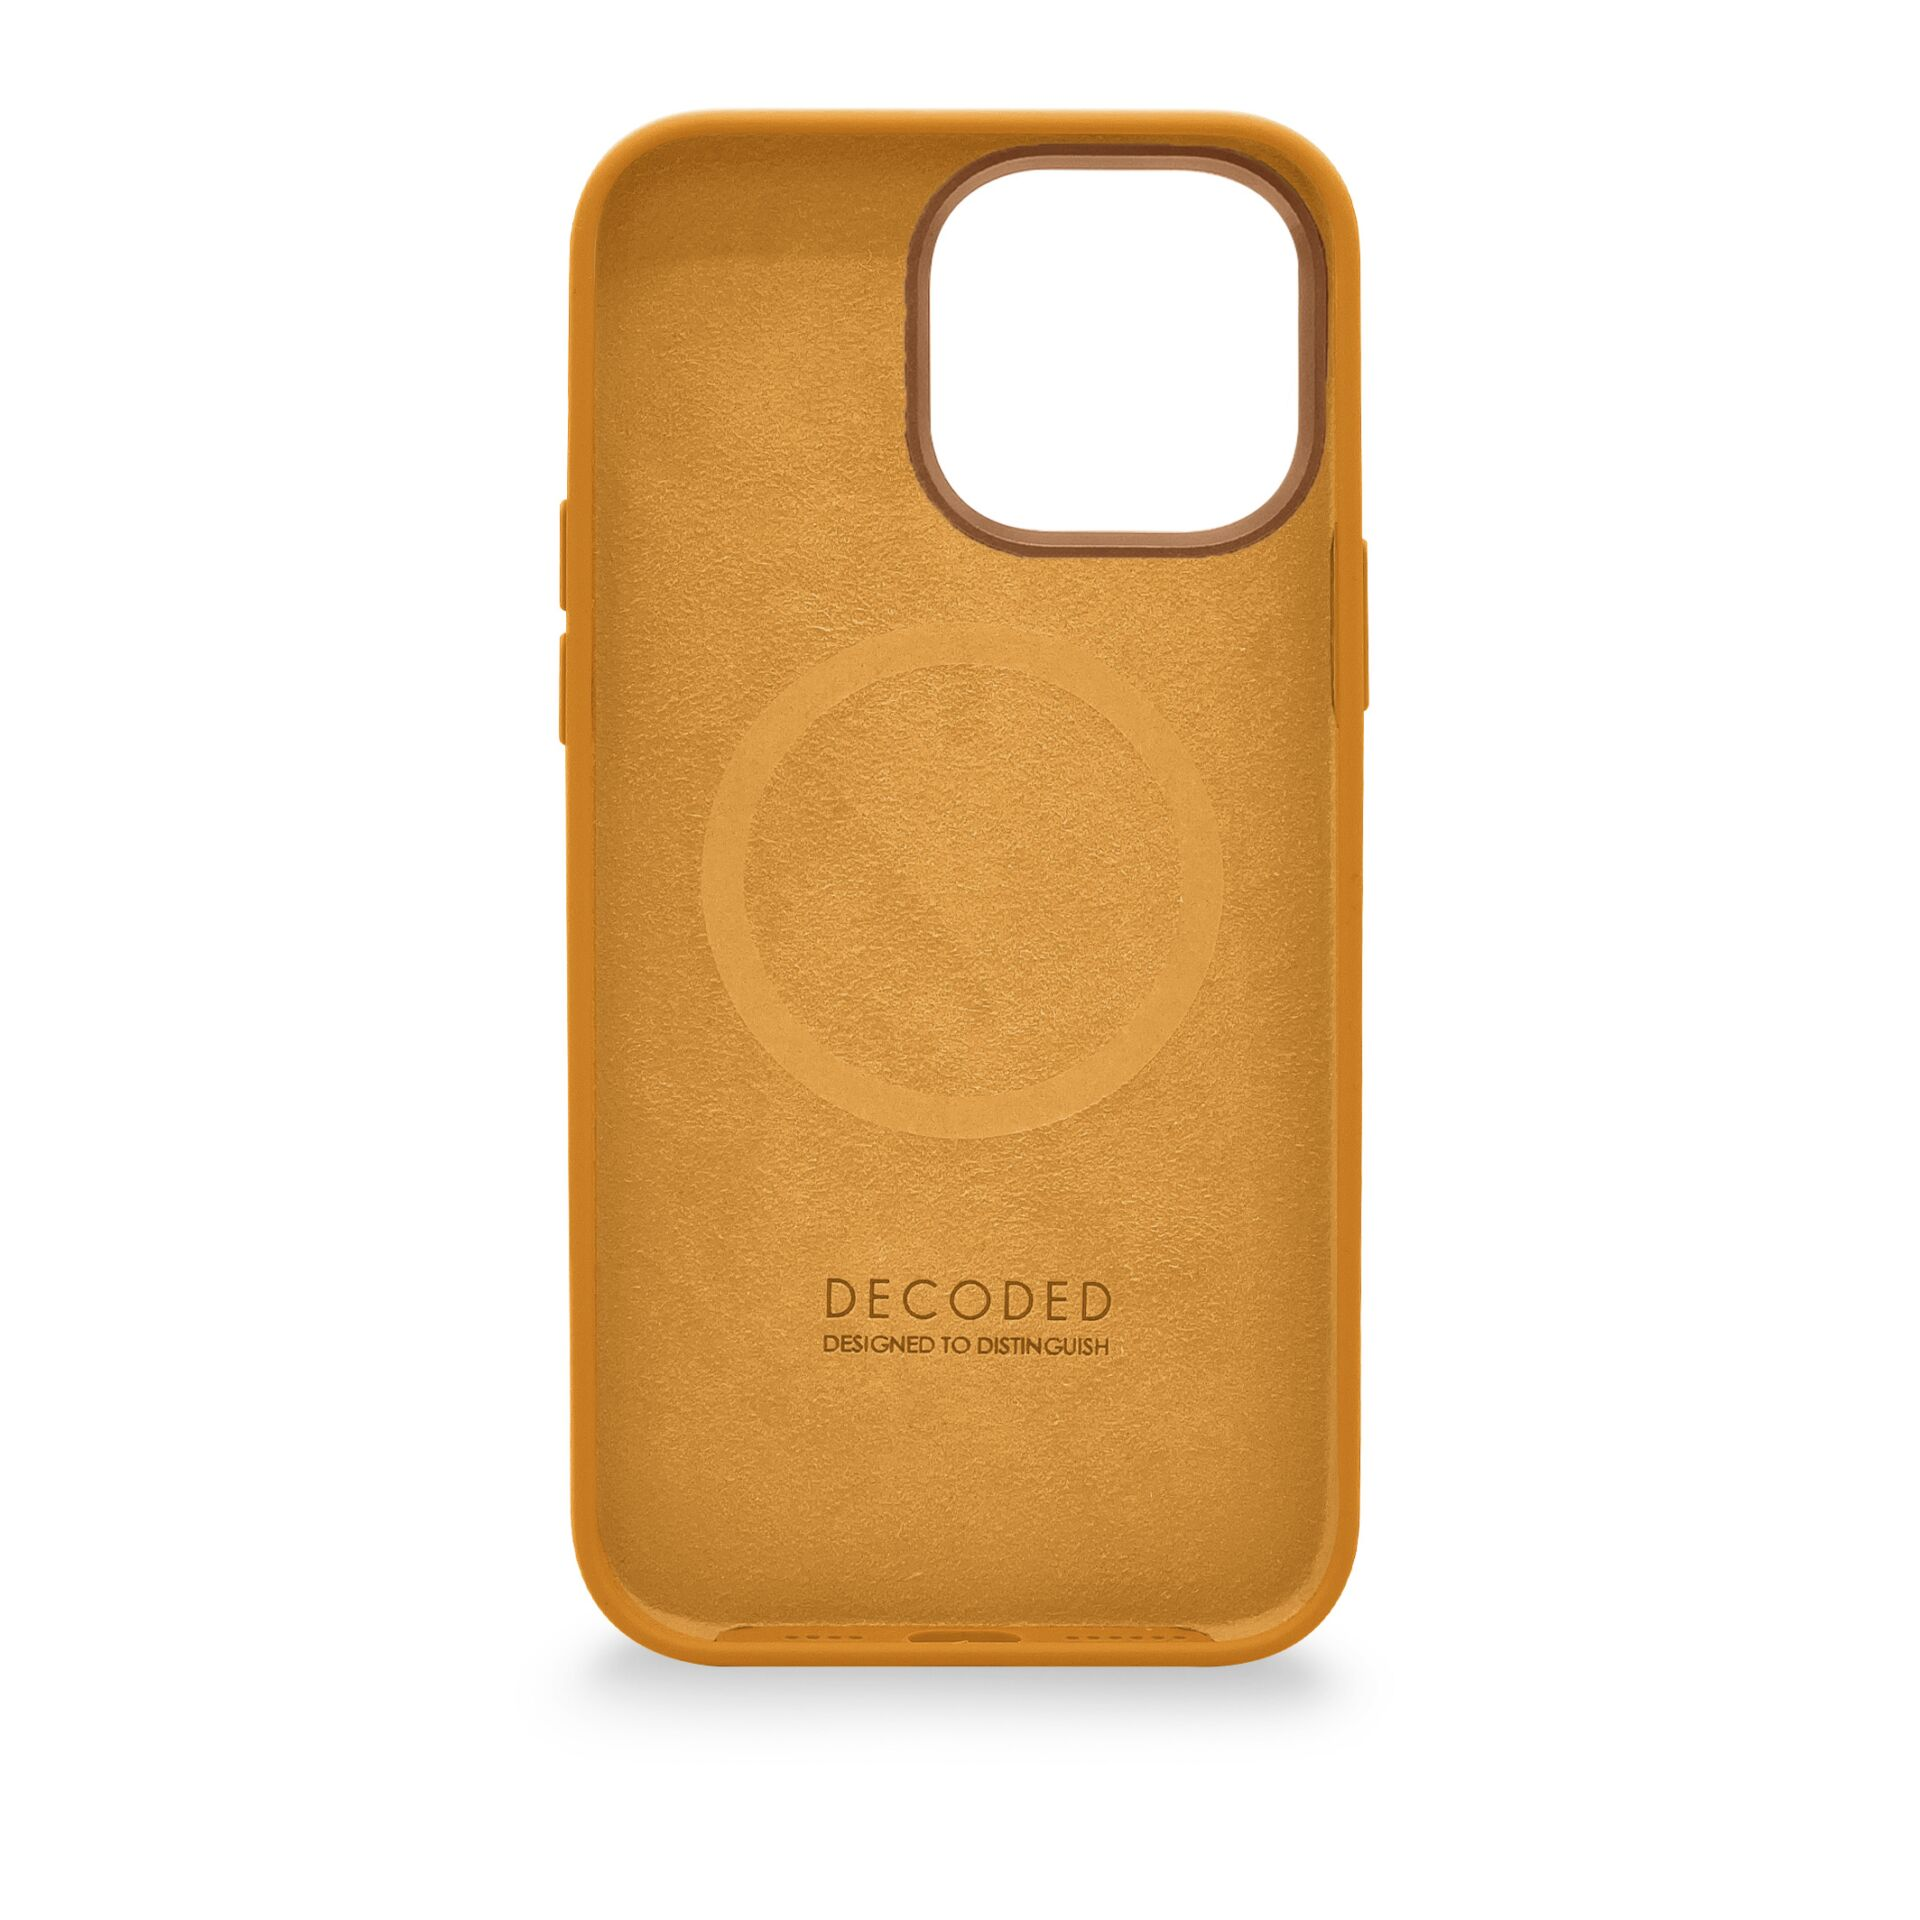 Apricot Apple, Apricot, iPhone Pro, DECODED AntiMicrobial Silicone 14 Backcover, Backcover